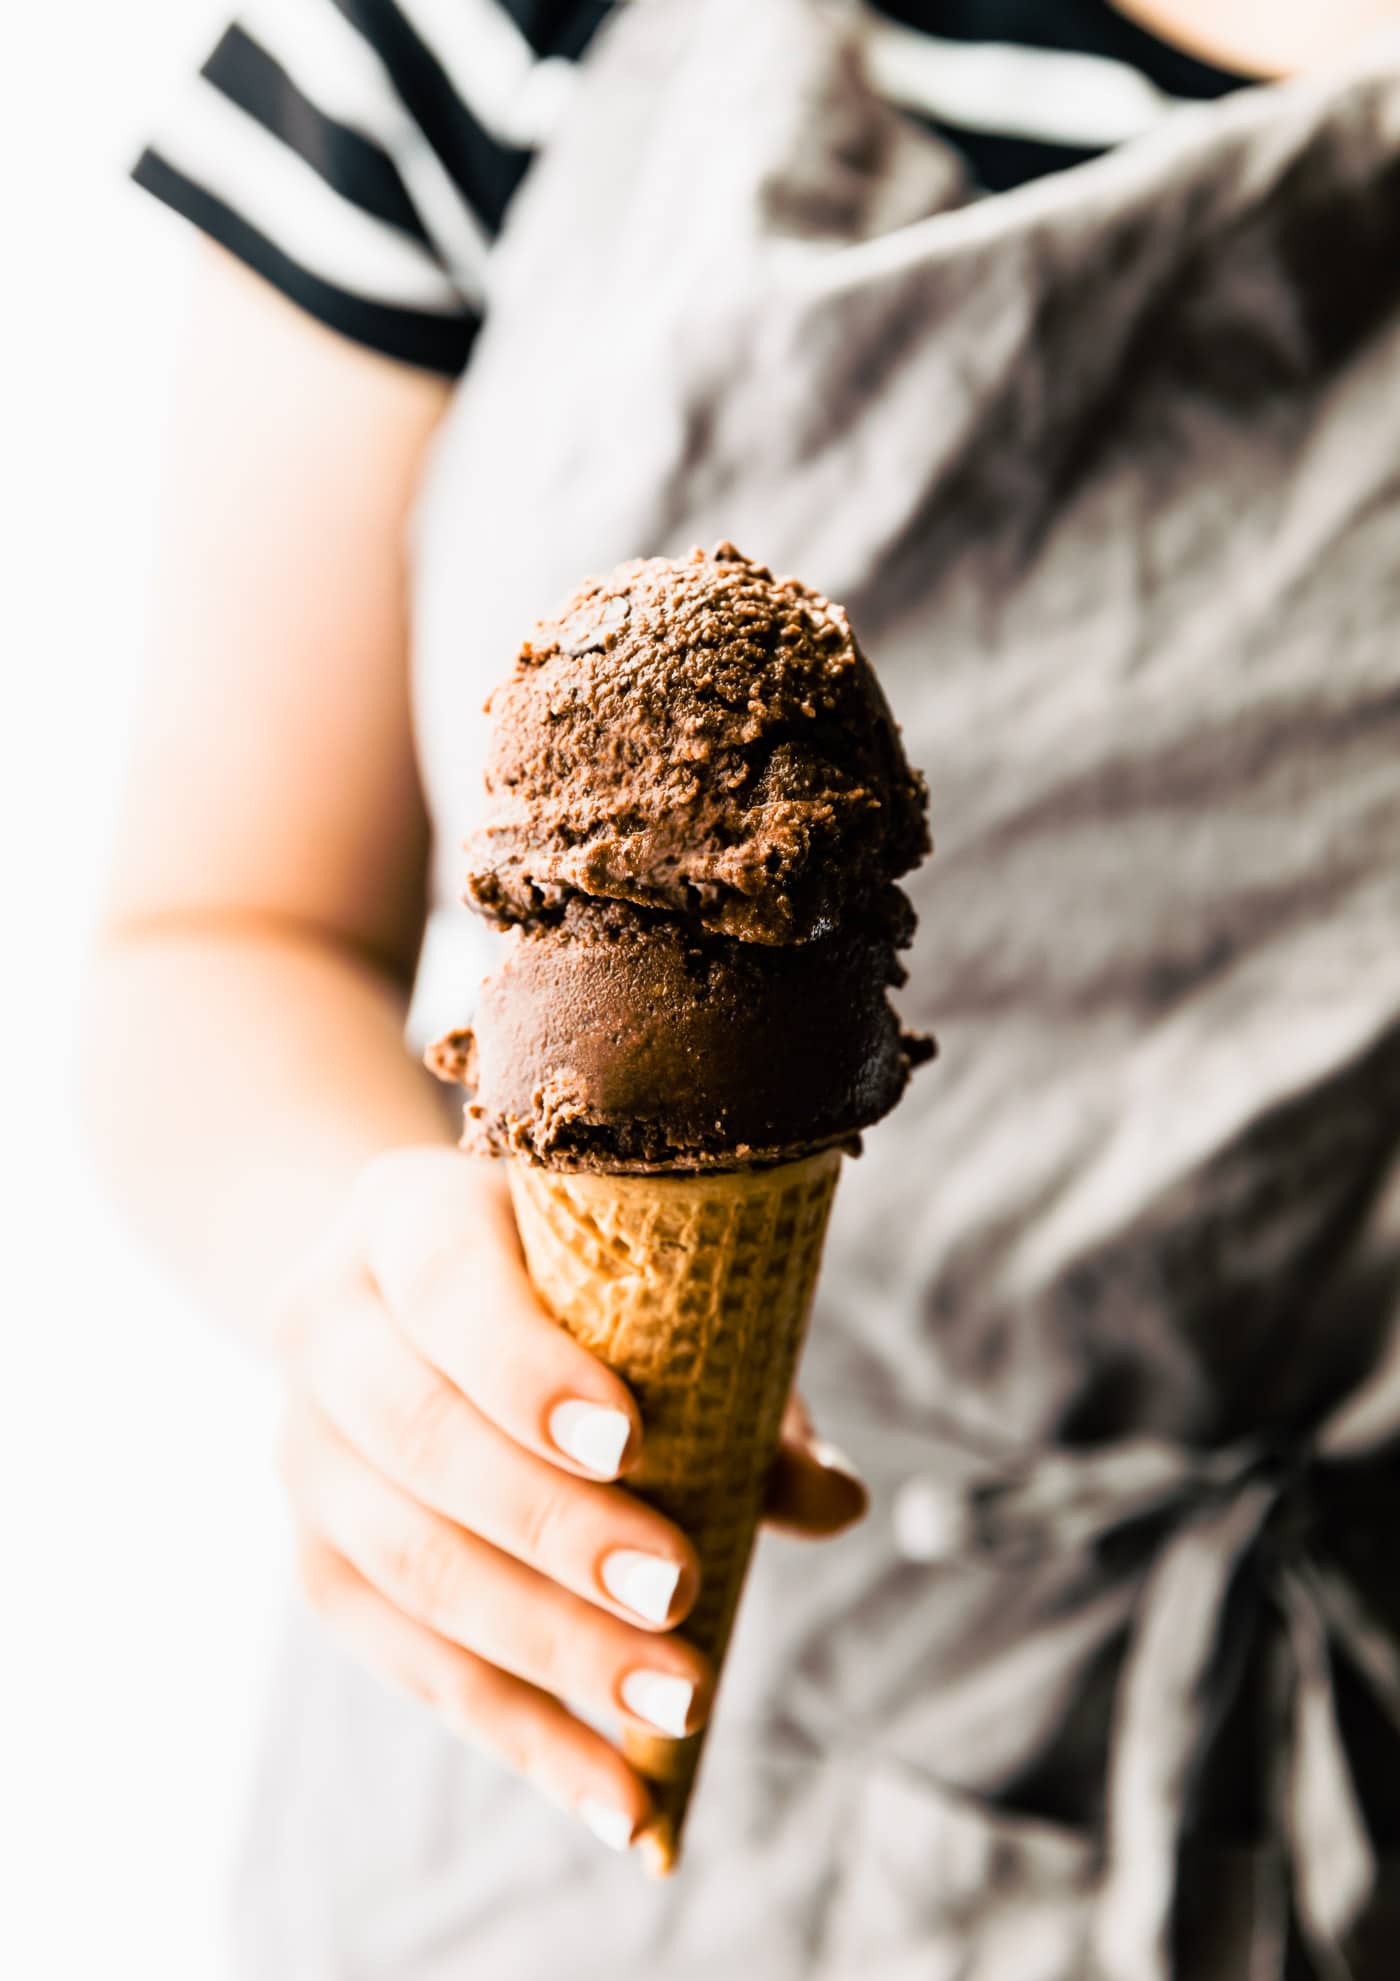 Double scoop espresso dark chocolate sorbet in waffle cone being held by a hand with painted nails.